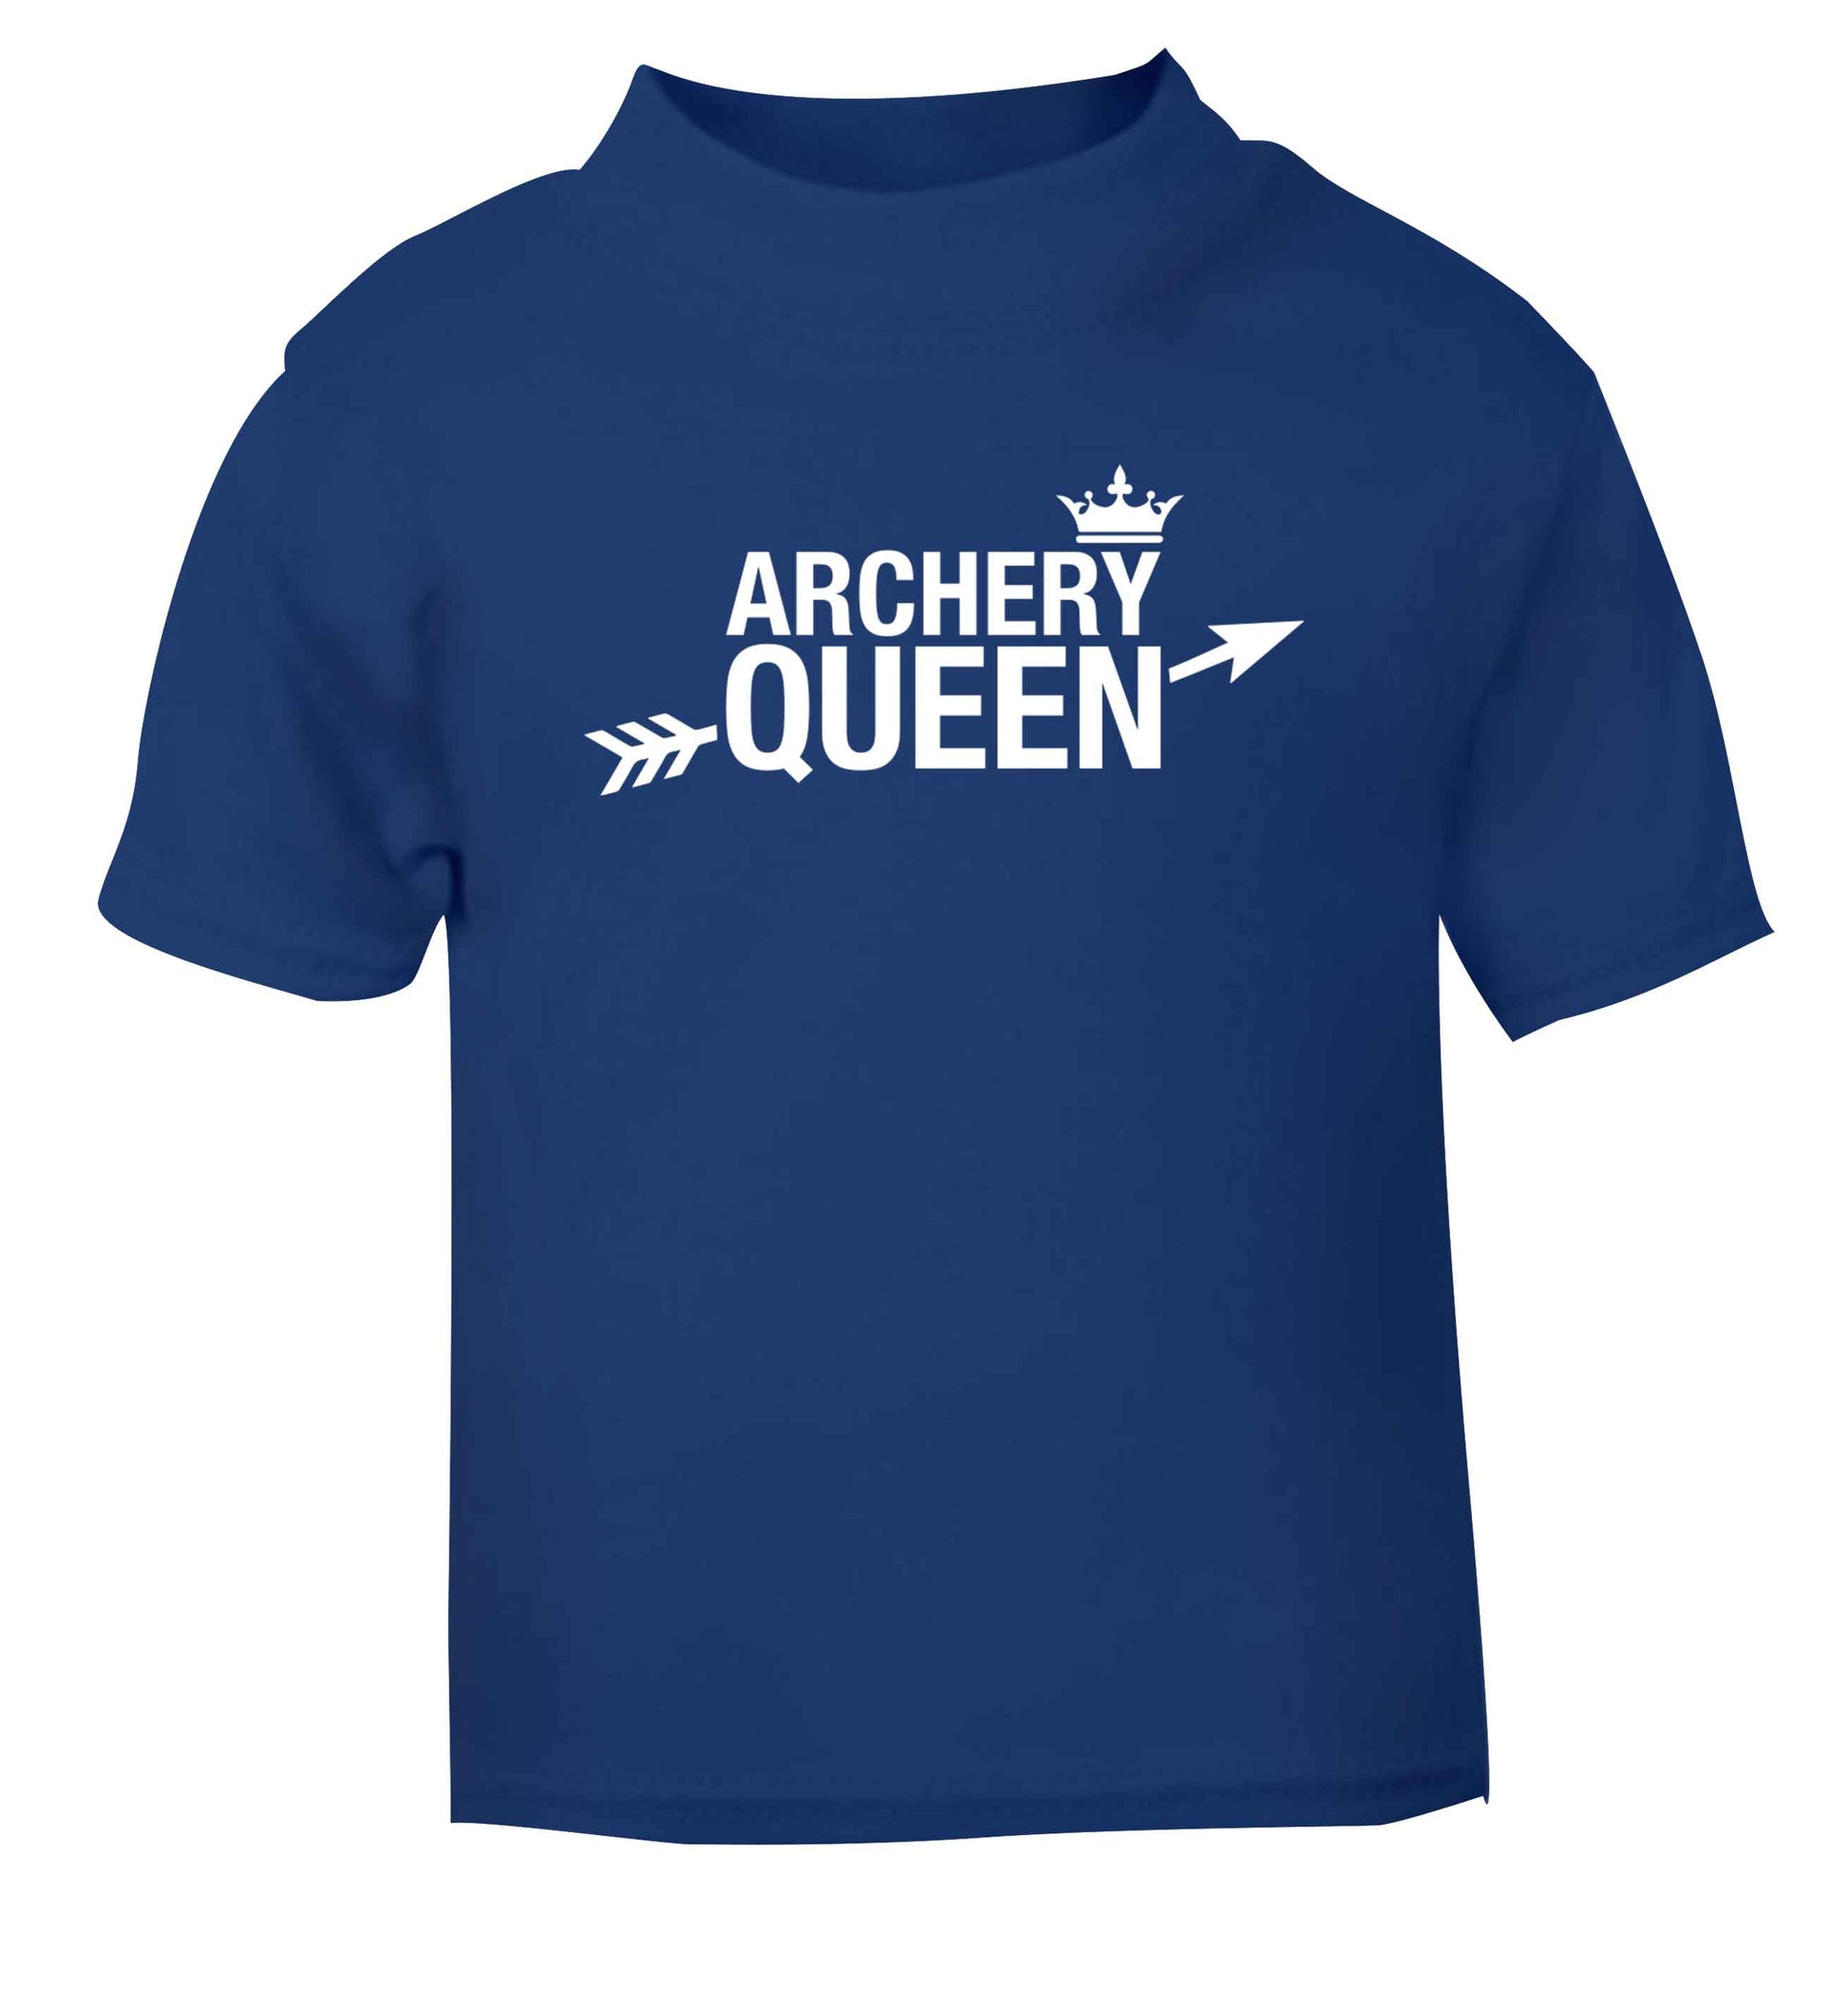 Archery queen blue Baby Toddler Tshirt 2 Years